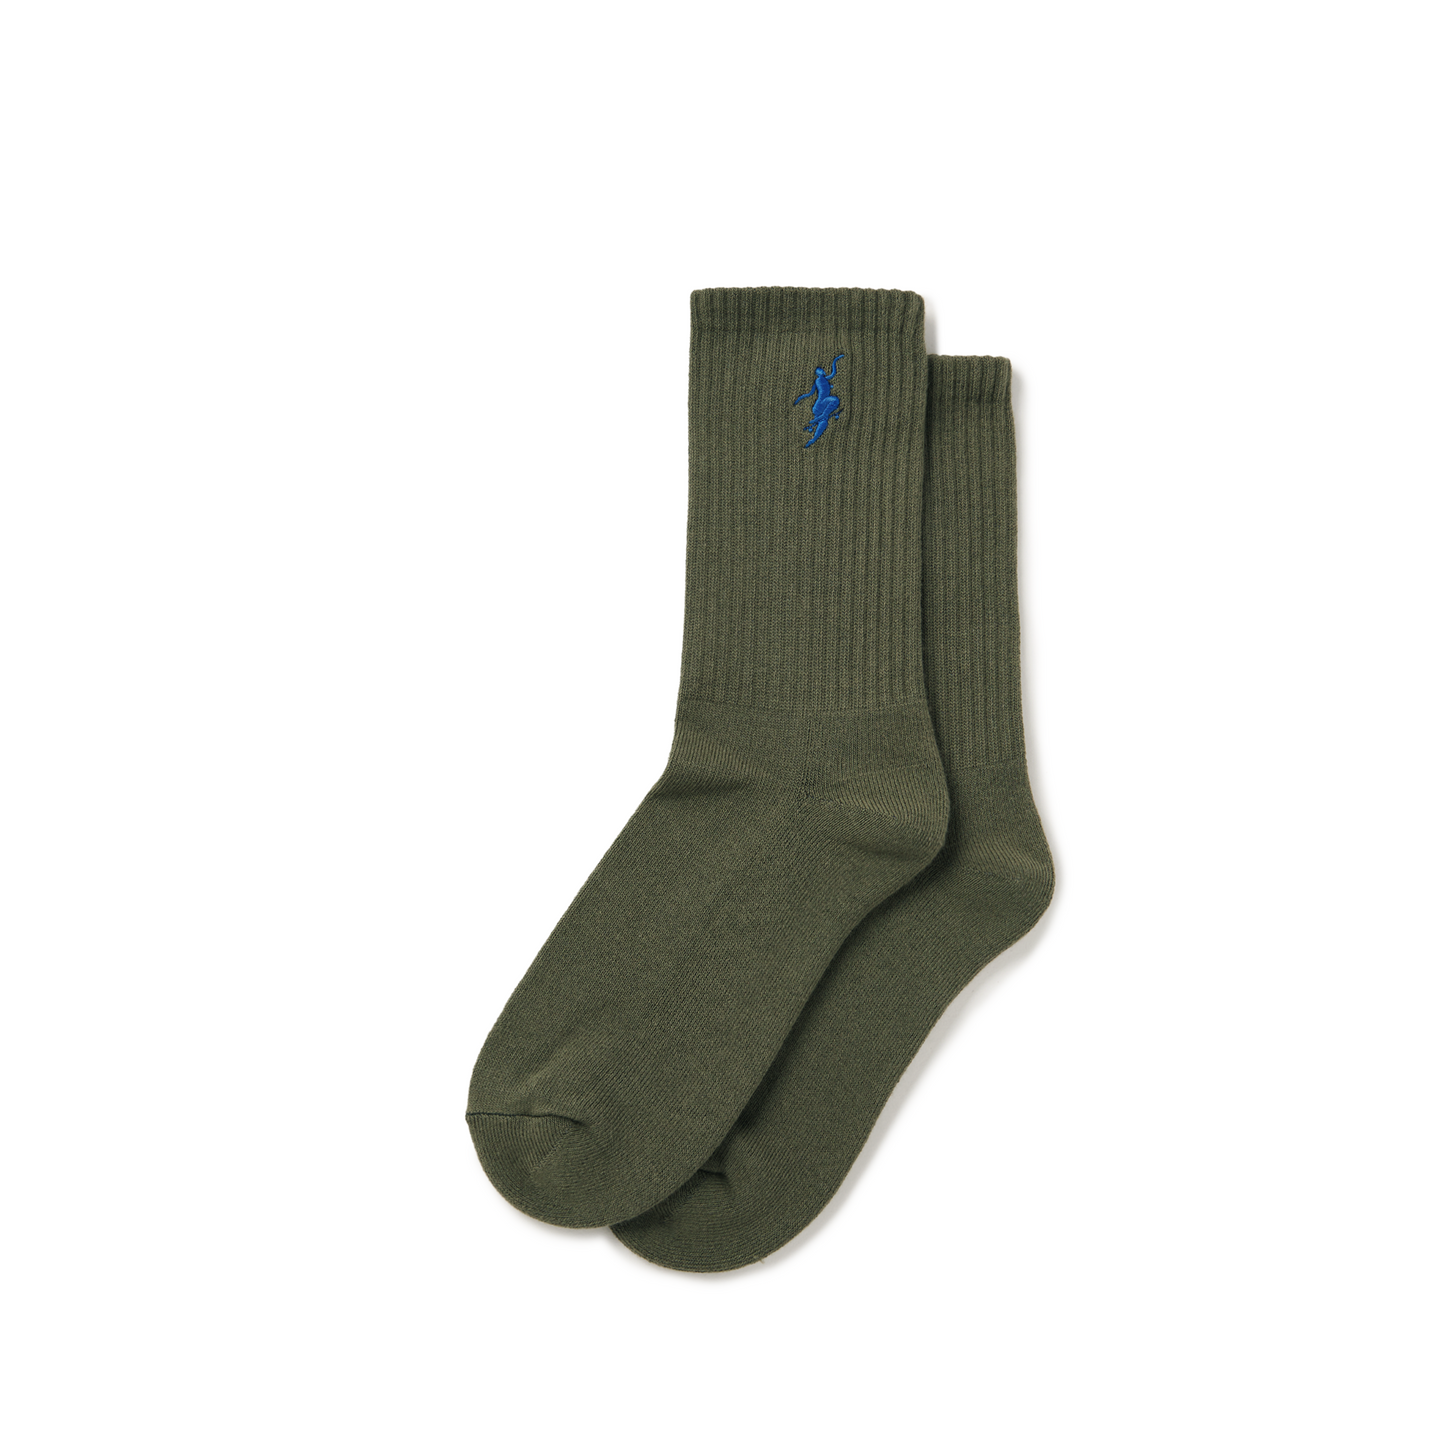 No Comply Rib Socks(color&Size options listed)